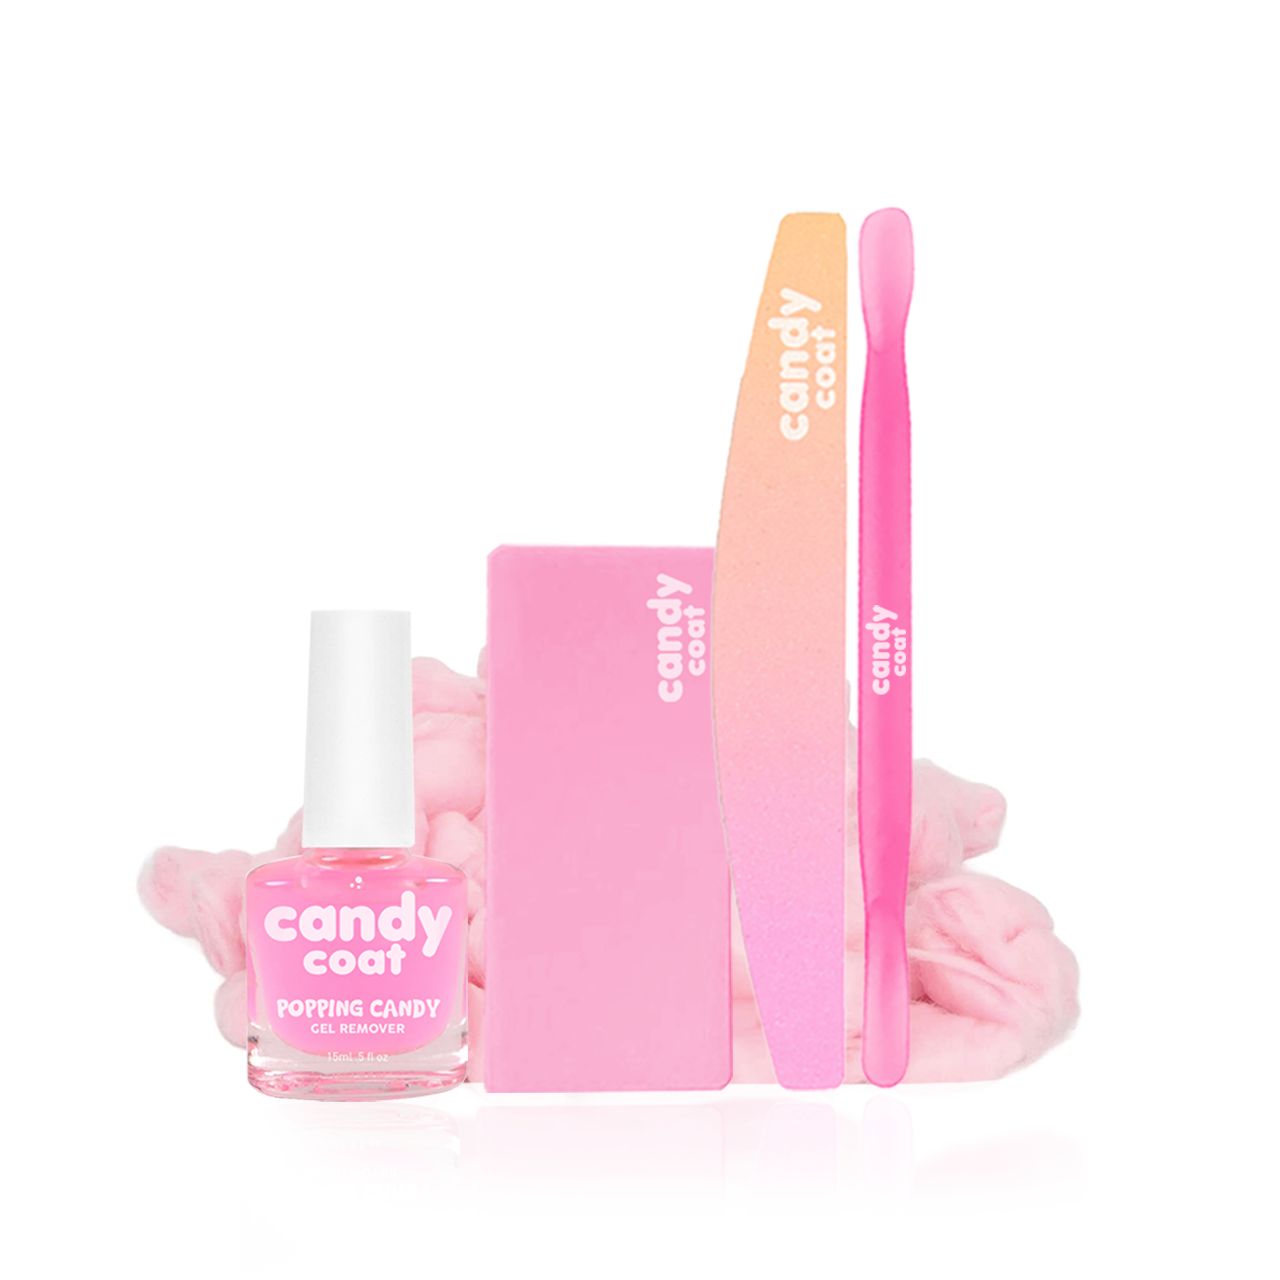 Candy Coat - Popping Candy Xpress Removal Kit